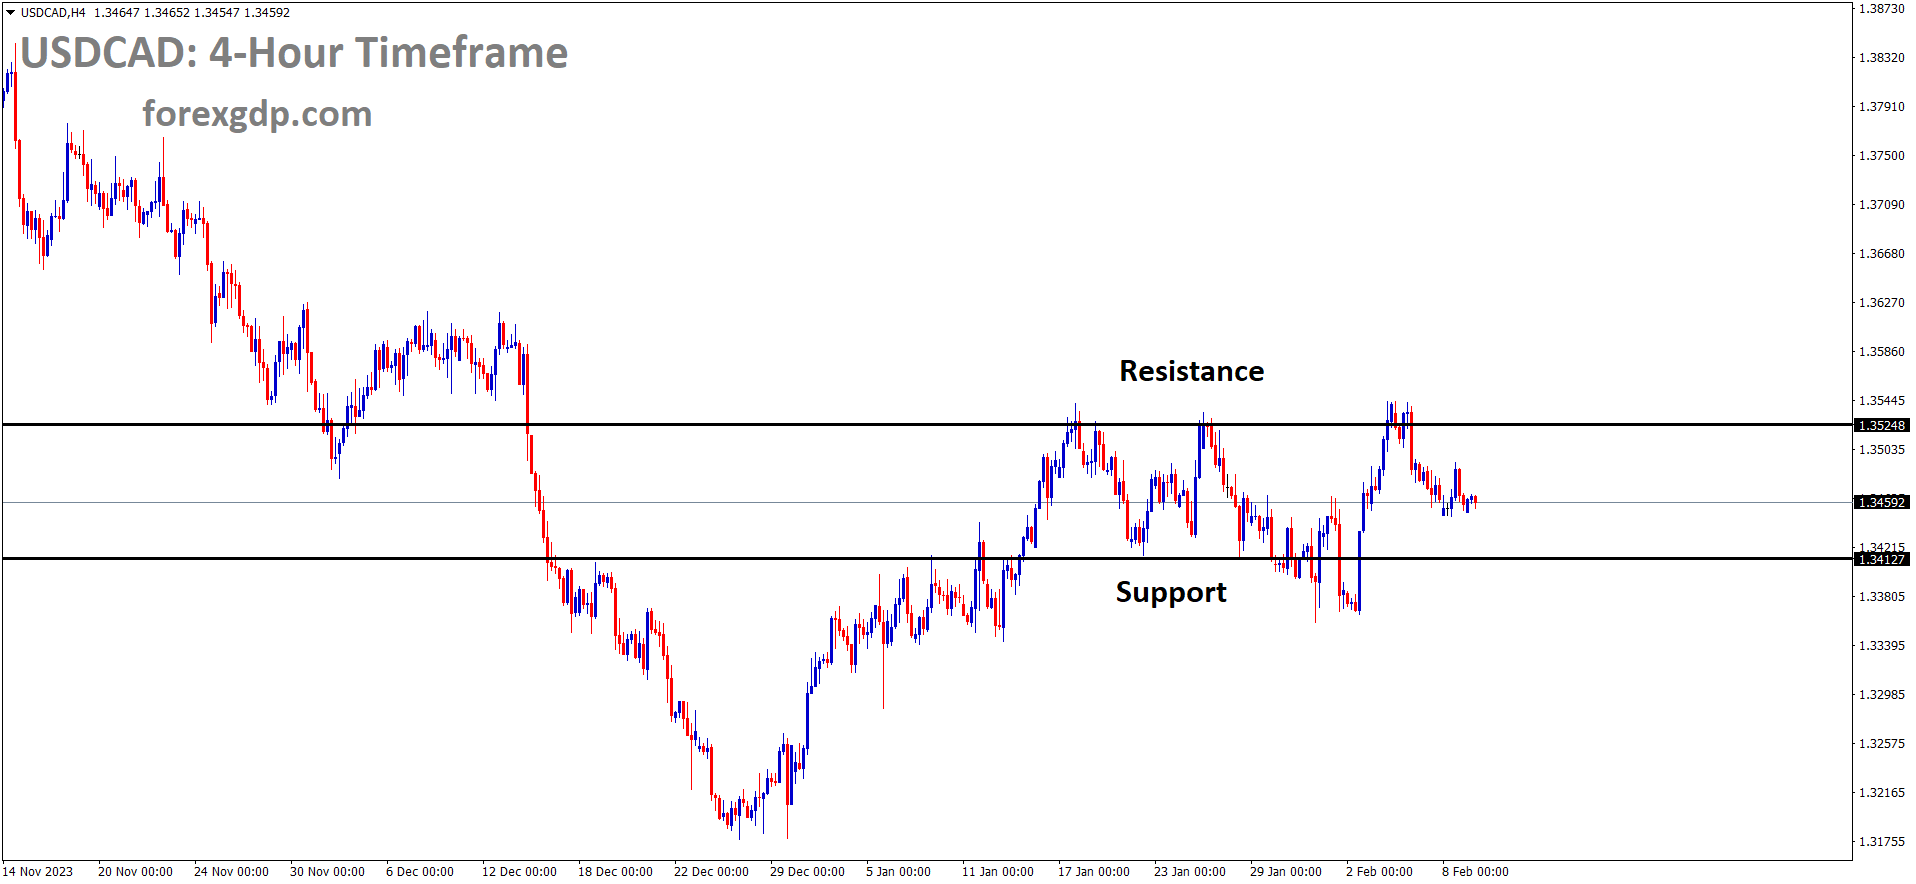 USDCAD is moving in the Box pattern and the market has fallen from the resistance area of the pattern